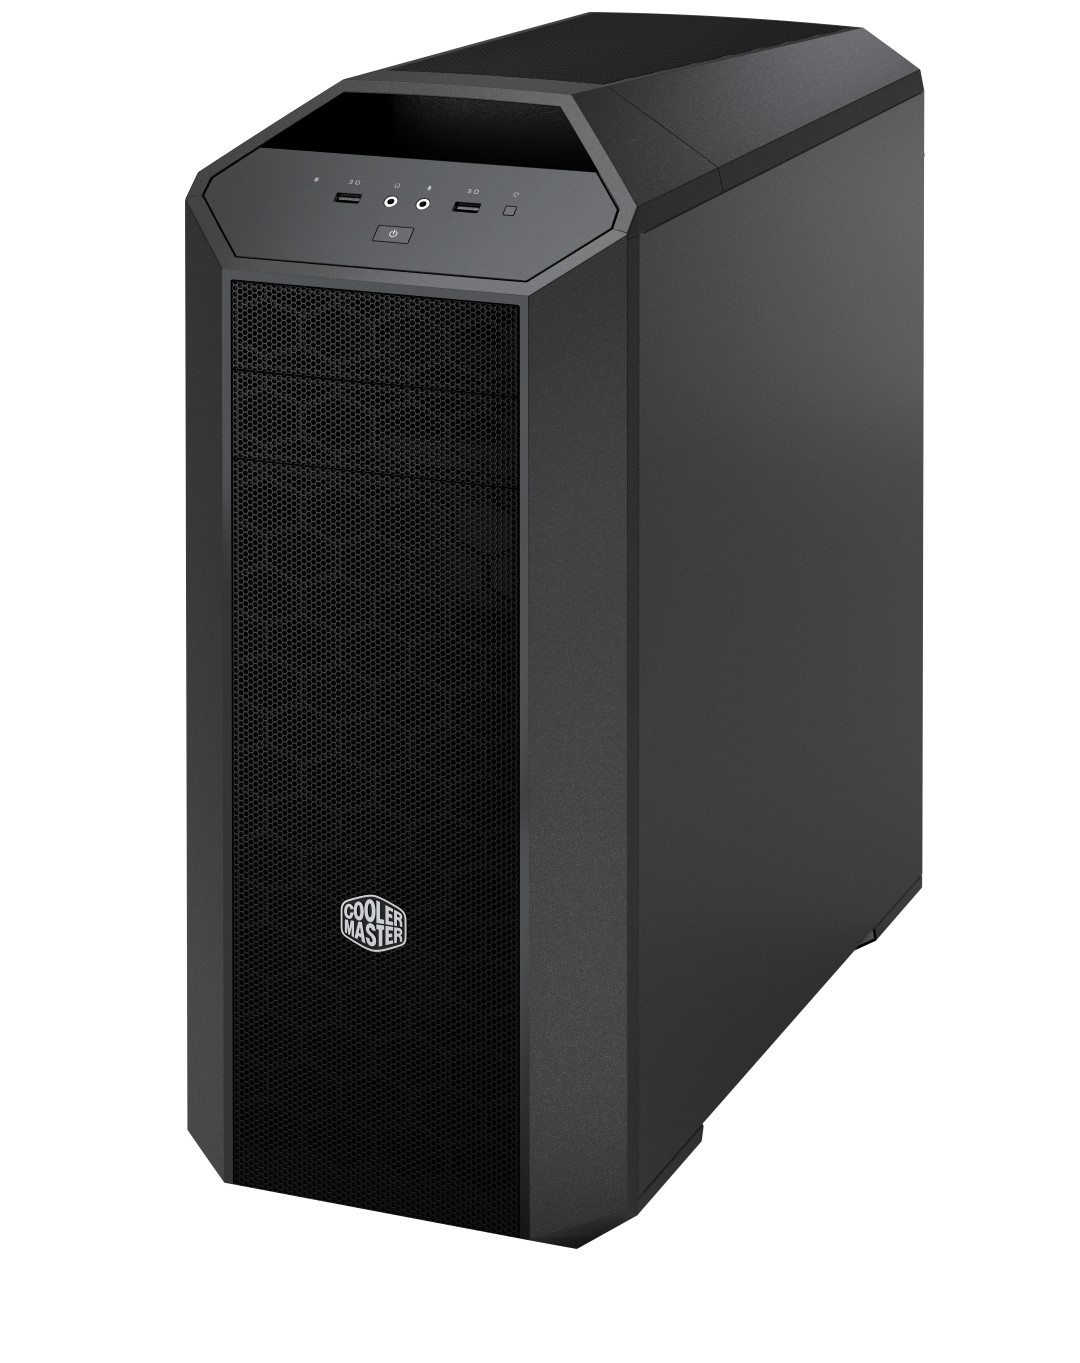 Cooler Master MasterCase 5 available on this 20th August 28